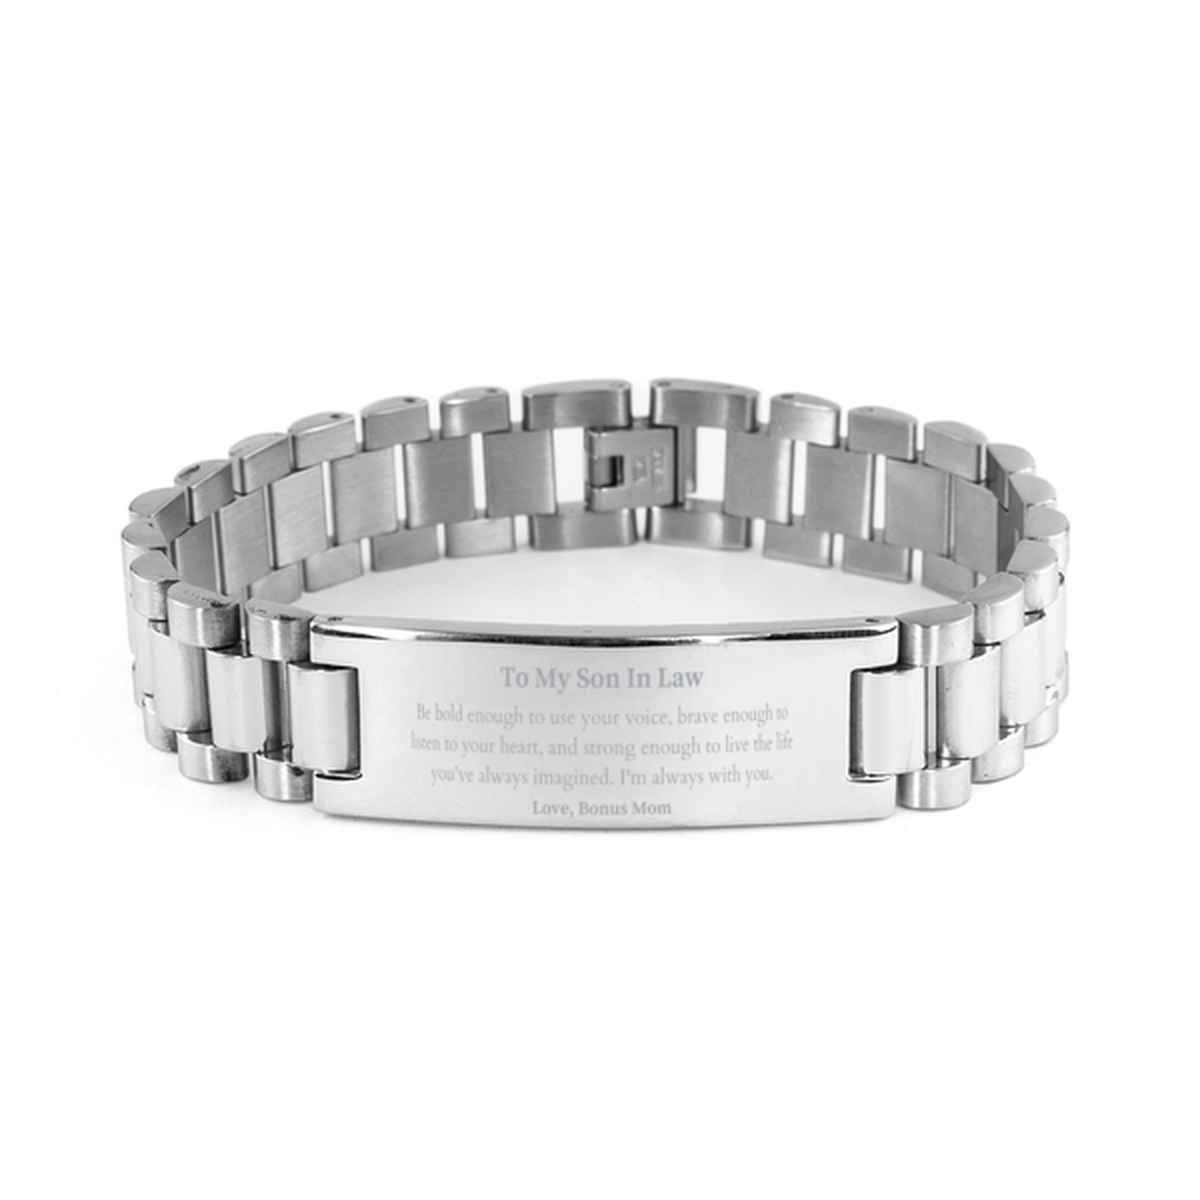 Keepsake Son In Law Ladder Stainless Steel Bracelet Gift Idea Graduation Christmas Birthday Son In Law from Bonus Mom, Son In Law Be bold enough to use your voice, brave enough to listen to your heart. Love, Bonus Mom